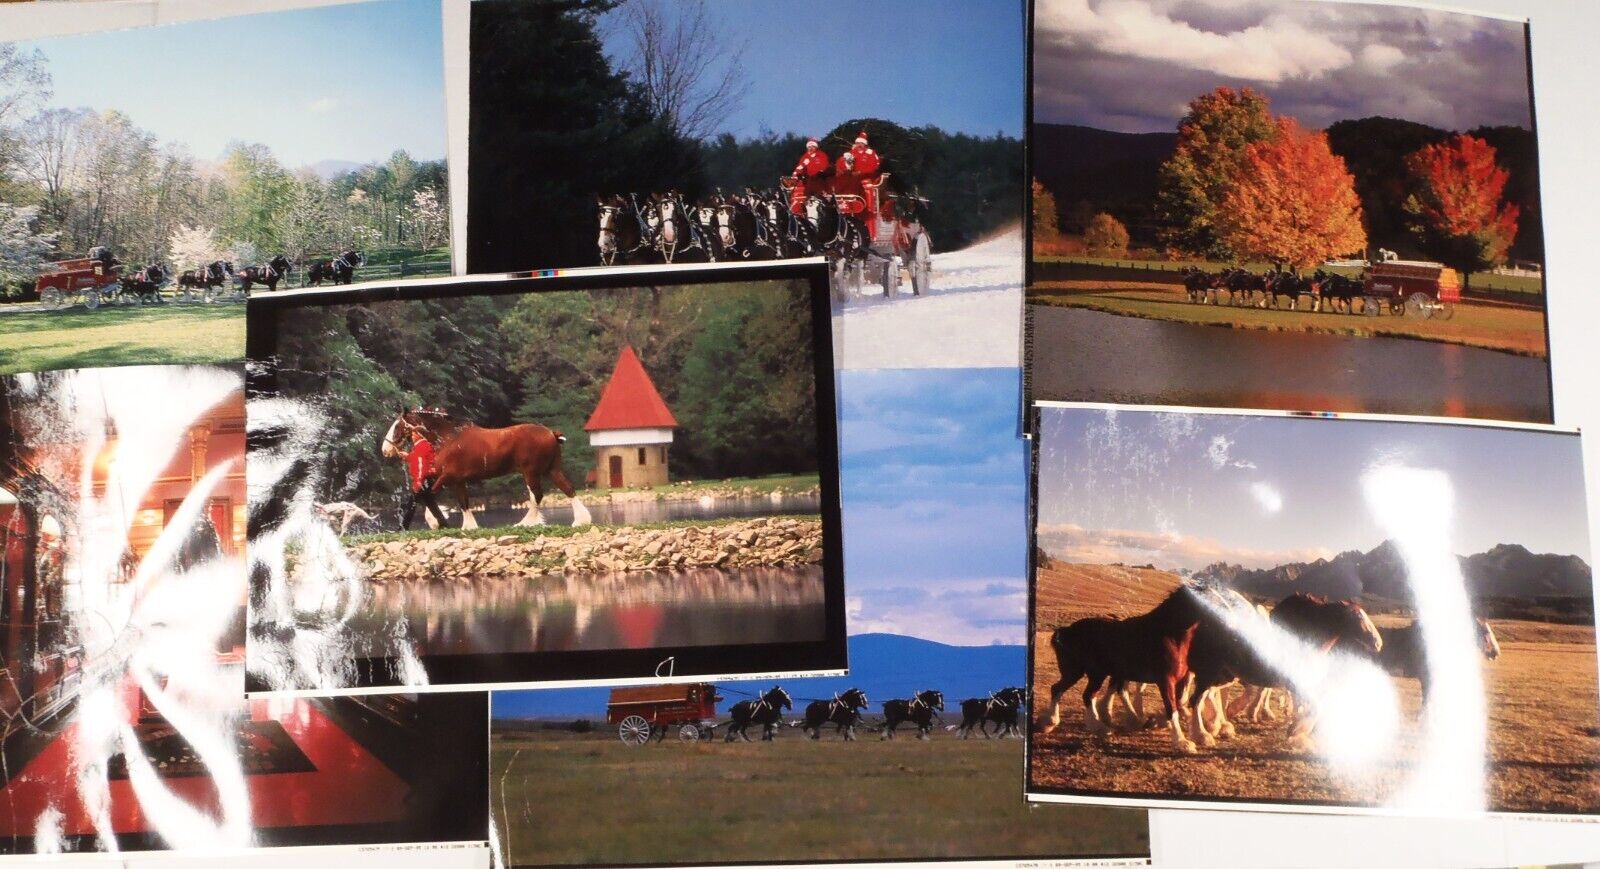 1995 BUDWEISER CLYDESDALES Beer Wagon Photo Chromalin Matchprint Proofs